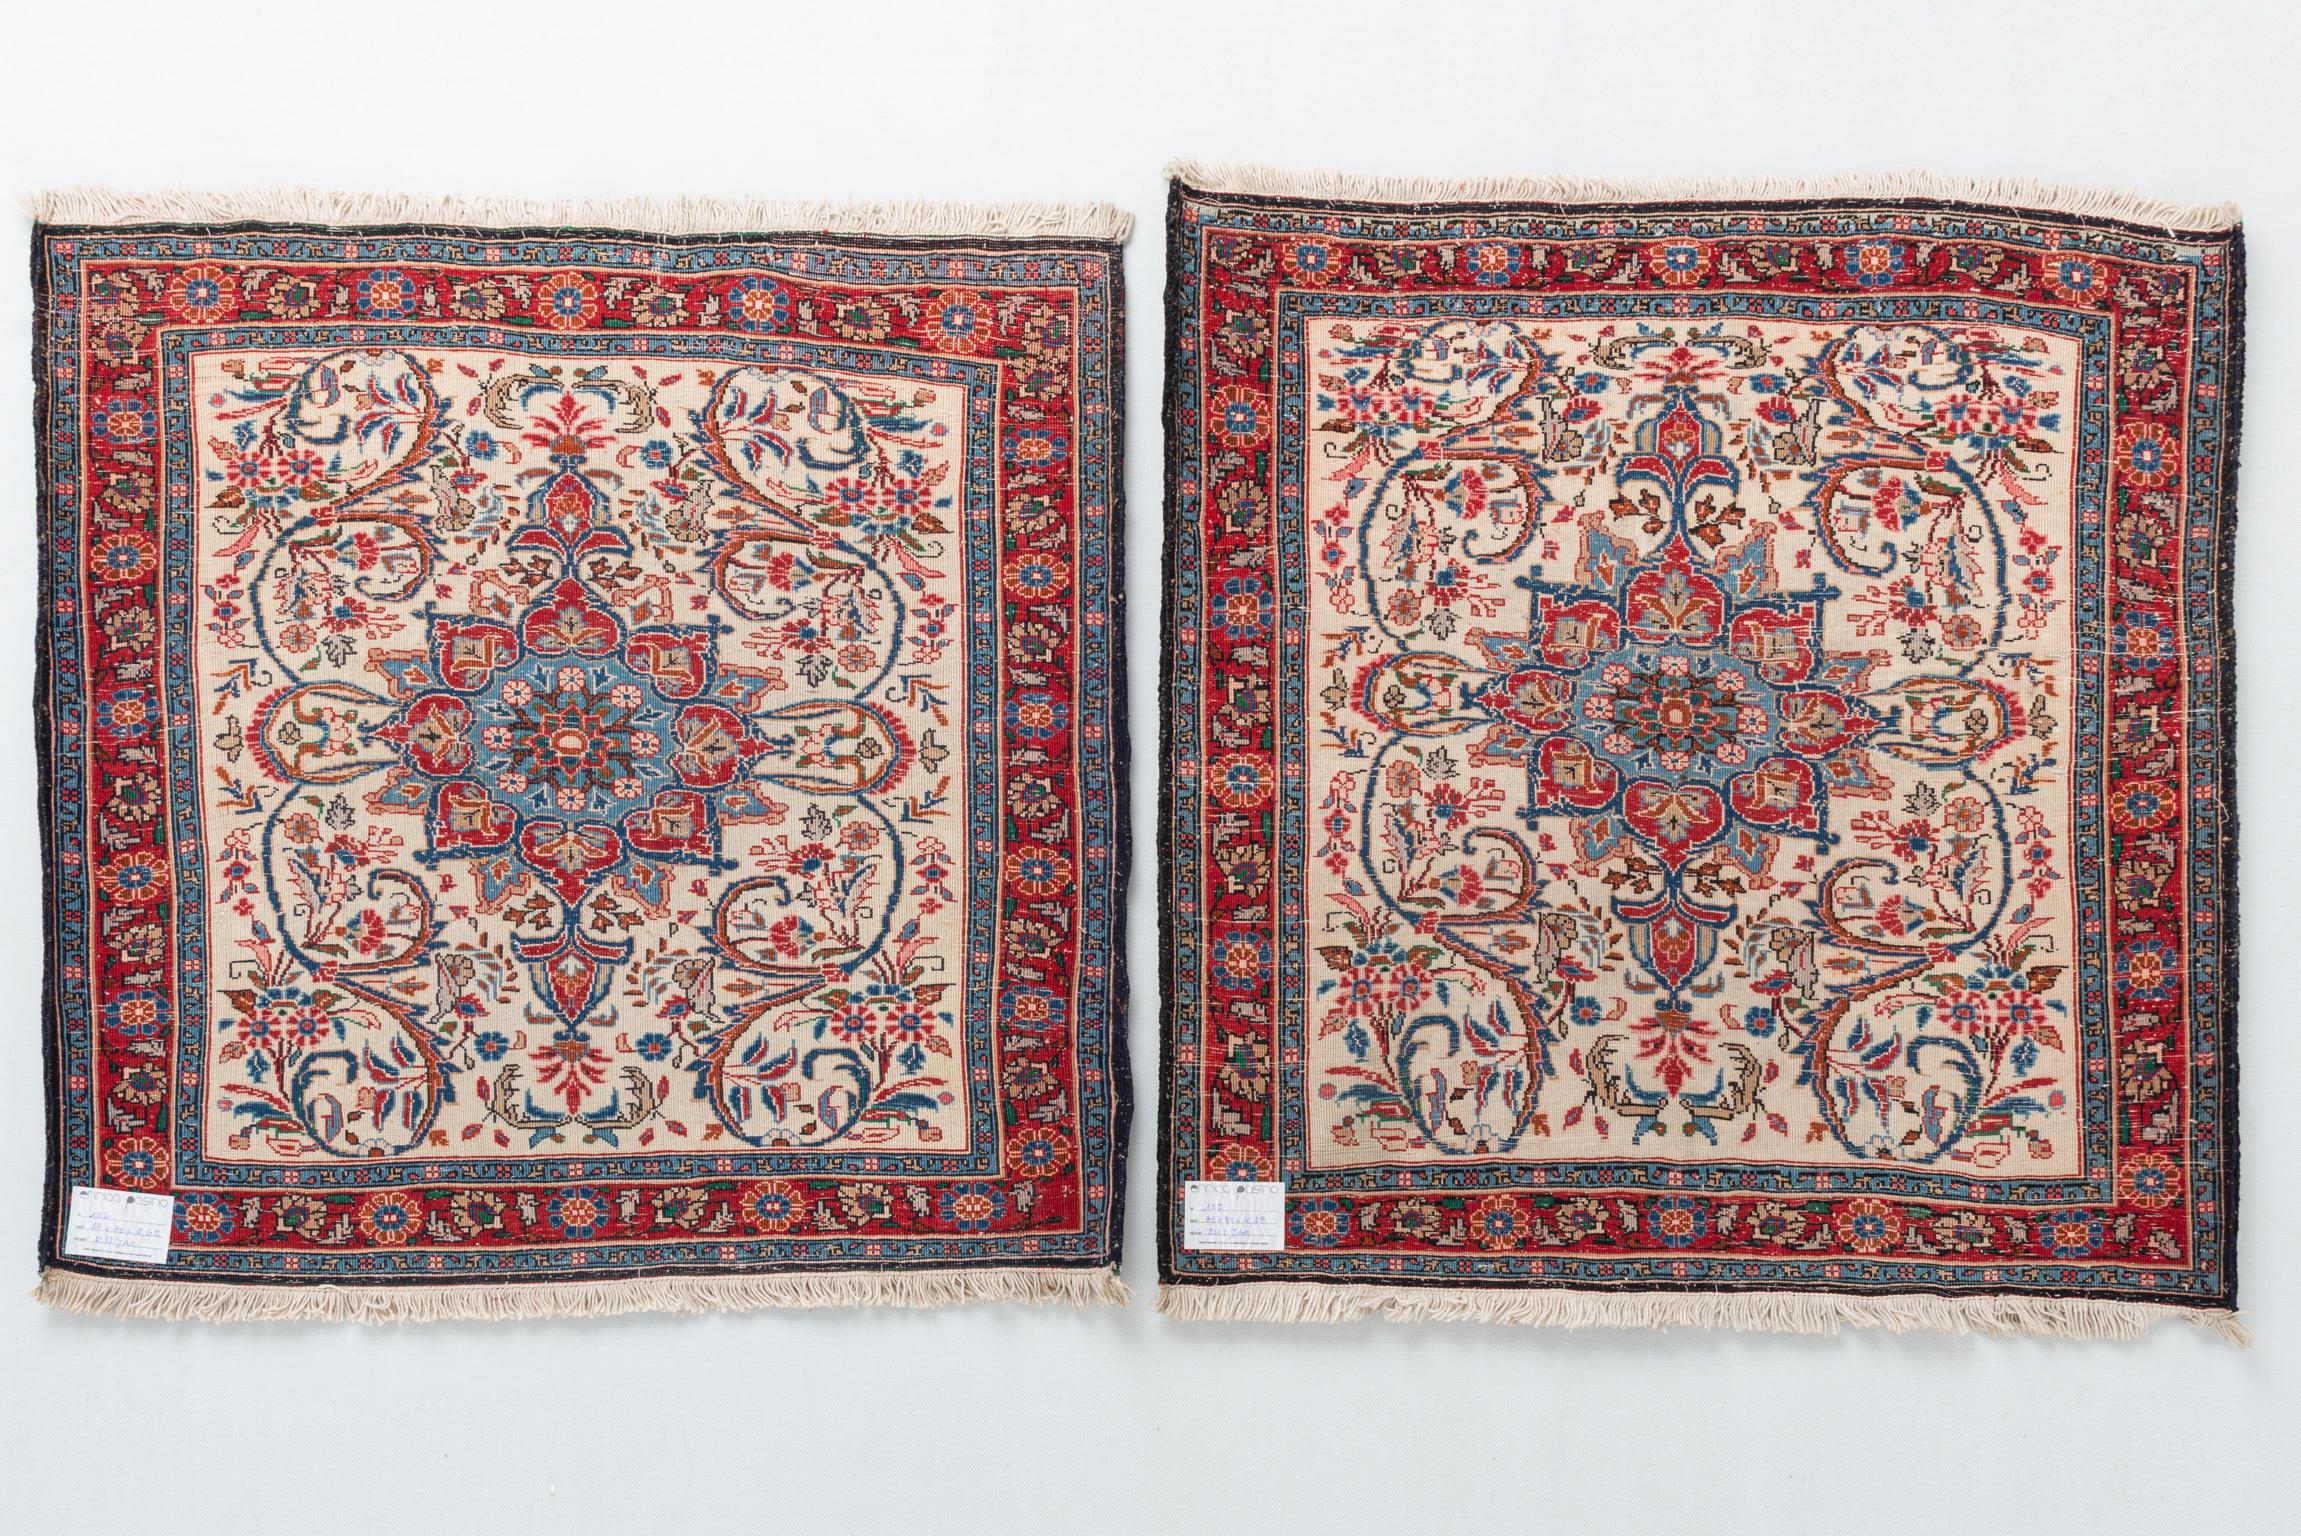 Hand-Knotted Pair of Little Square Indian Carpets or Cushions For Sale